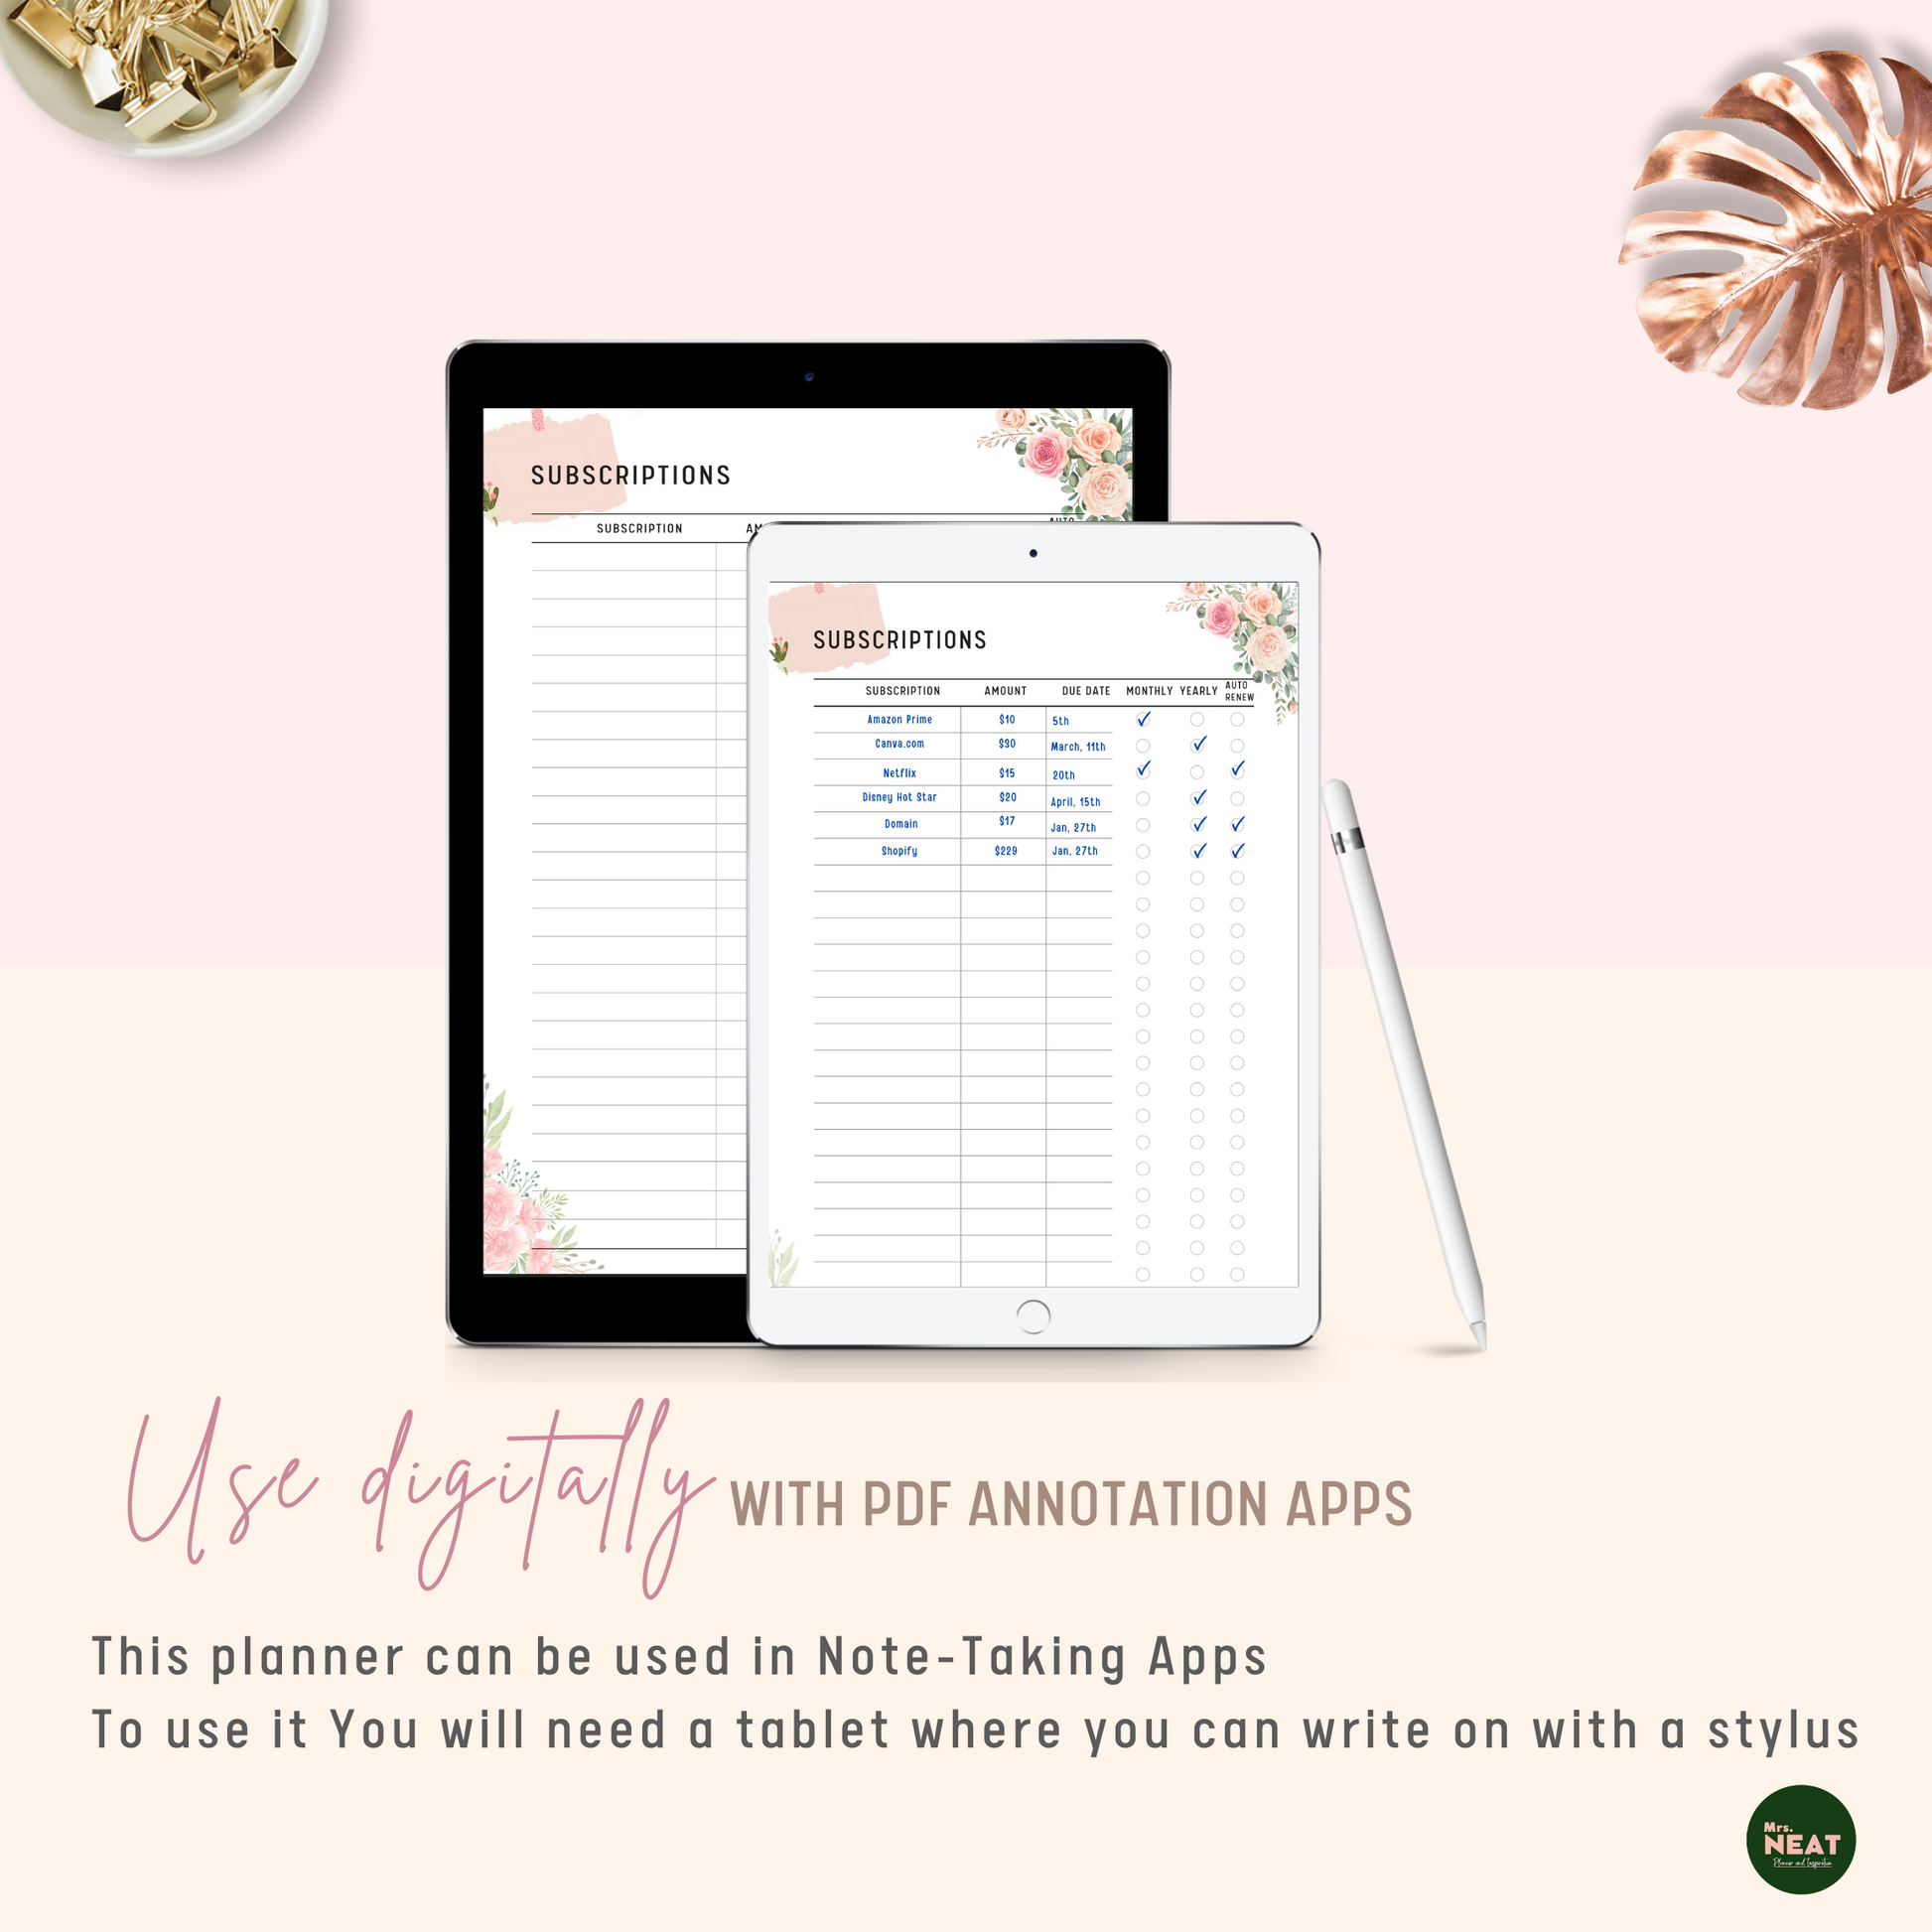 Floral Subscription Tracker Planner used Digitally with Tablet and Stylus